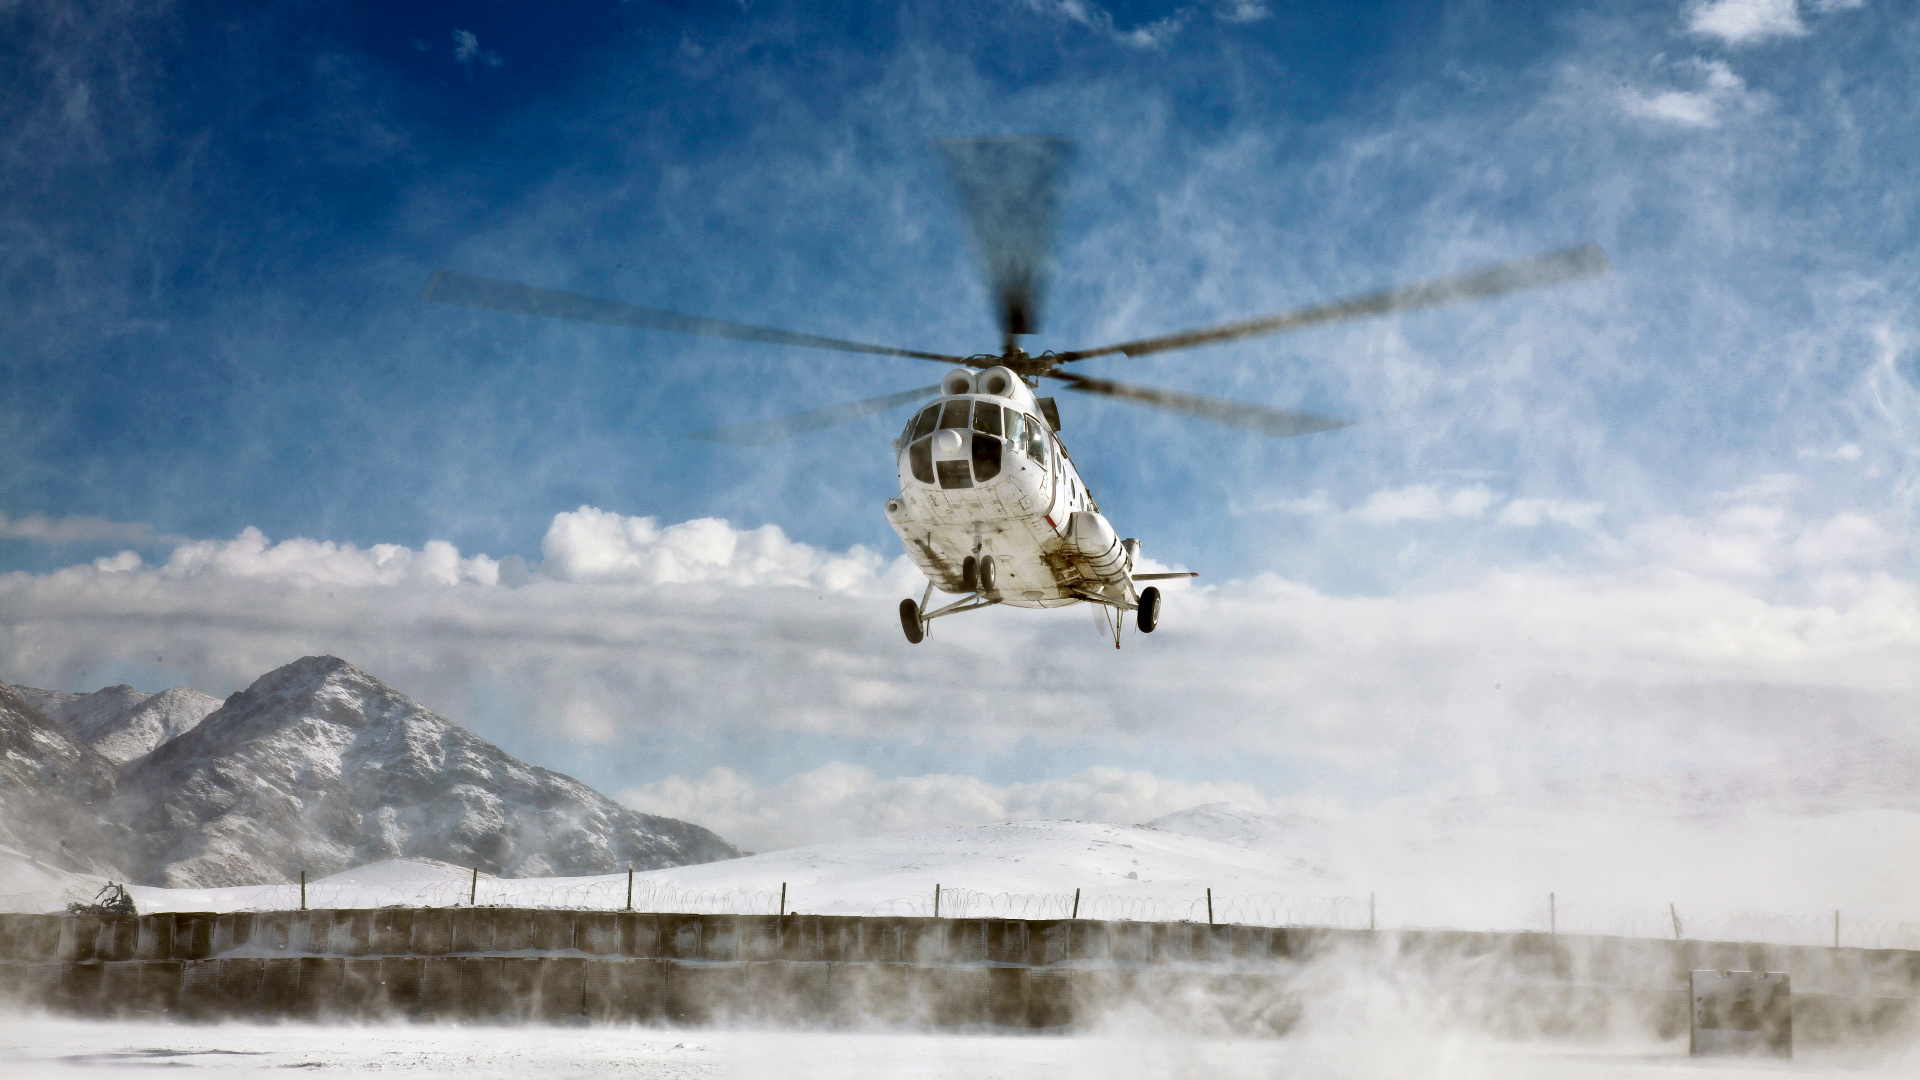 White and Black Helicopter Flying Over Snow Covered Mountain During Daytime. Wallpaper in 1920x1080 Resolution